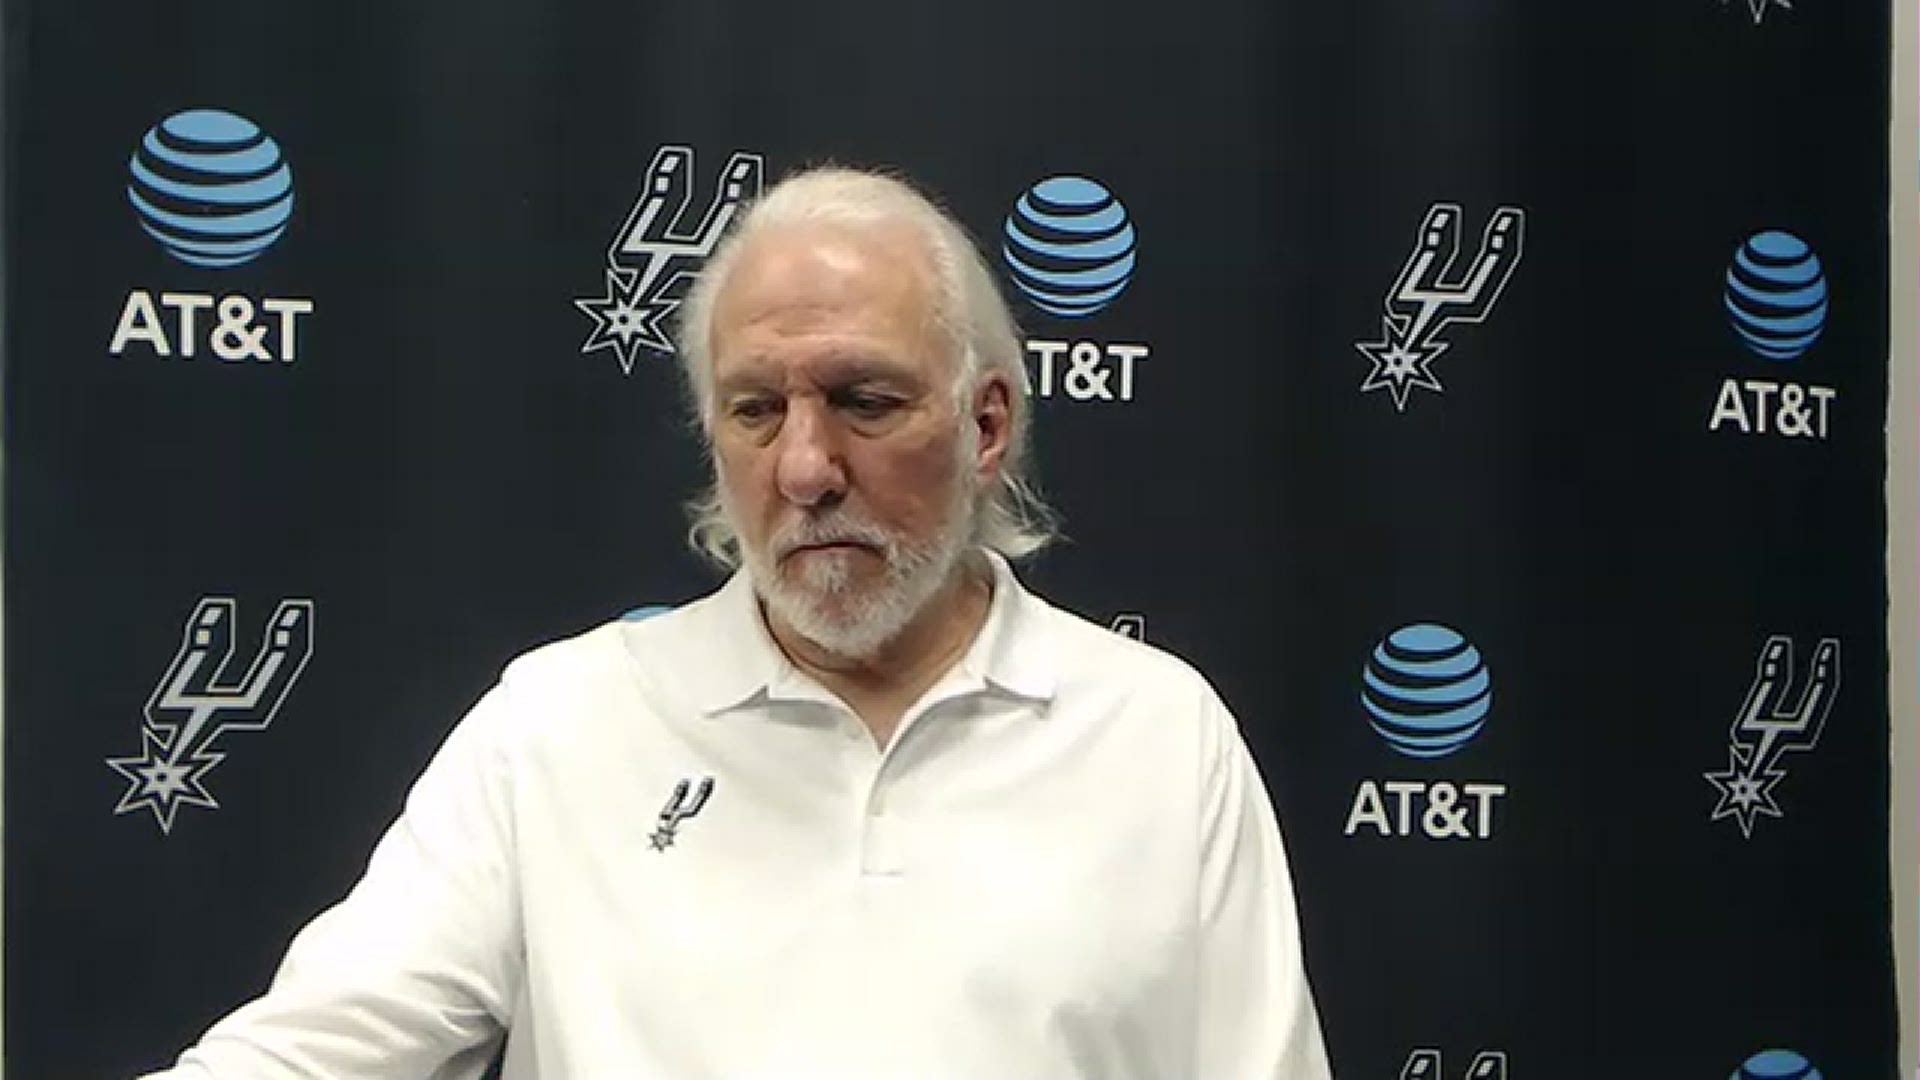 Pop spoke about the grueling schedule, injuries, and the coming need to rest some guys.